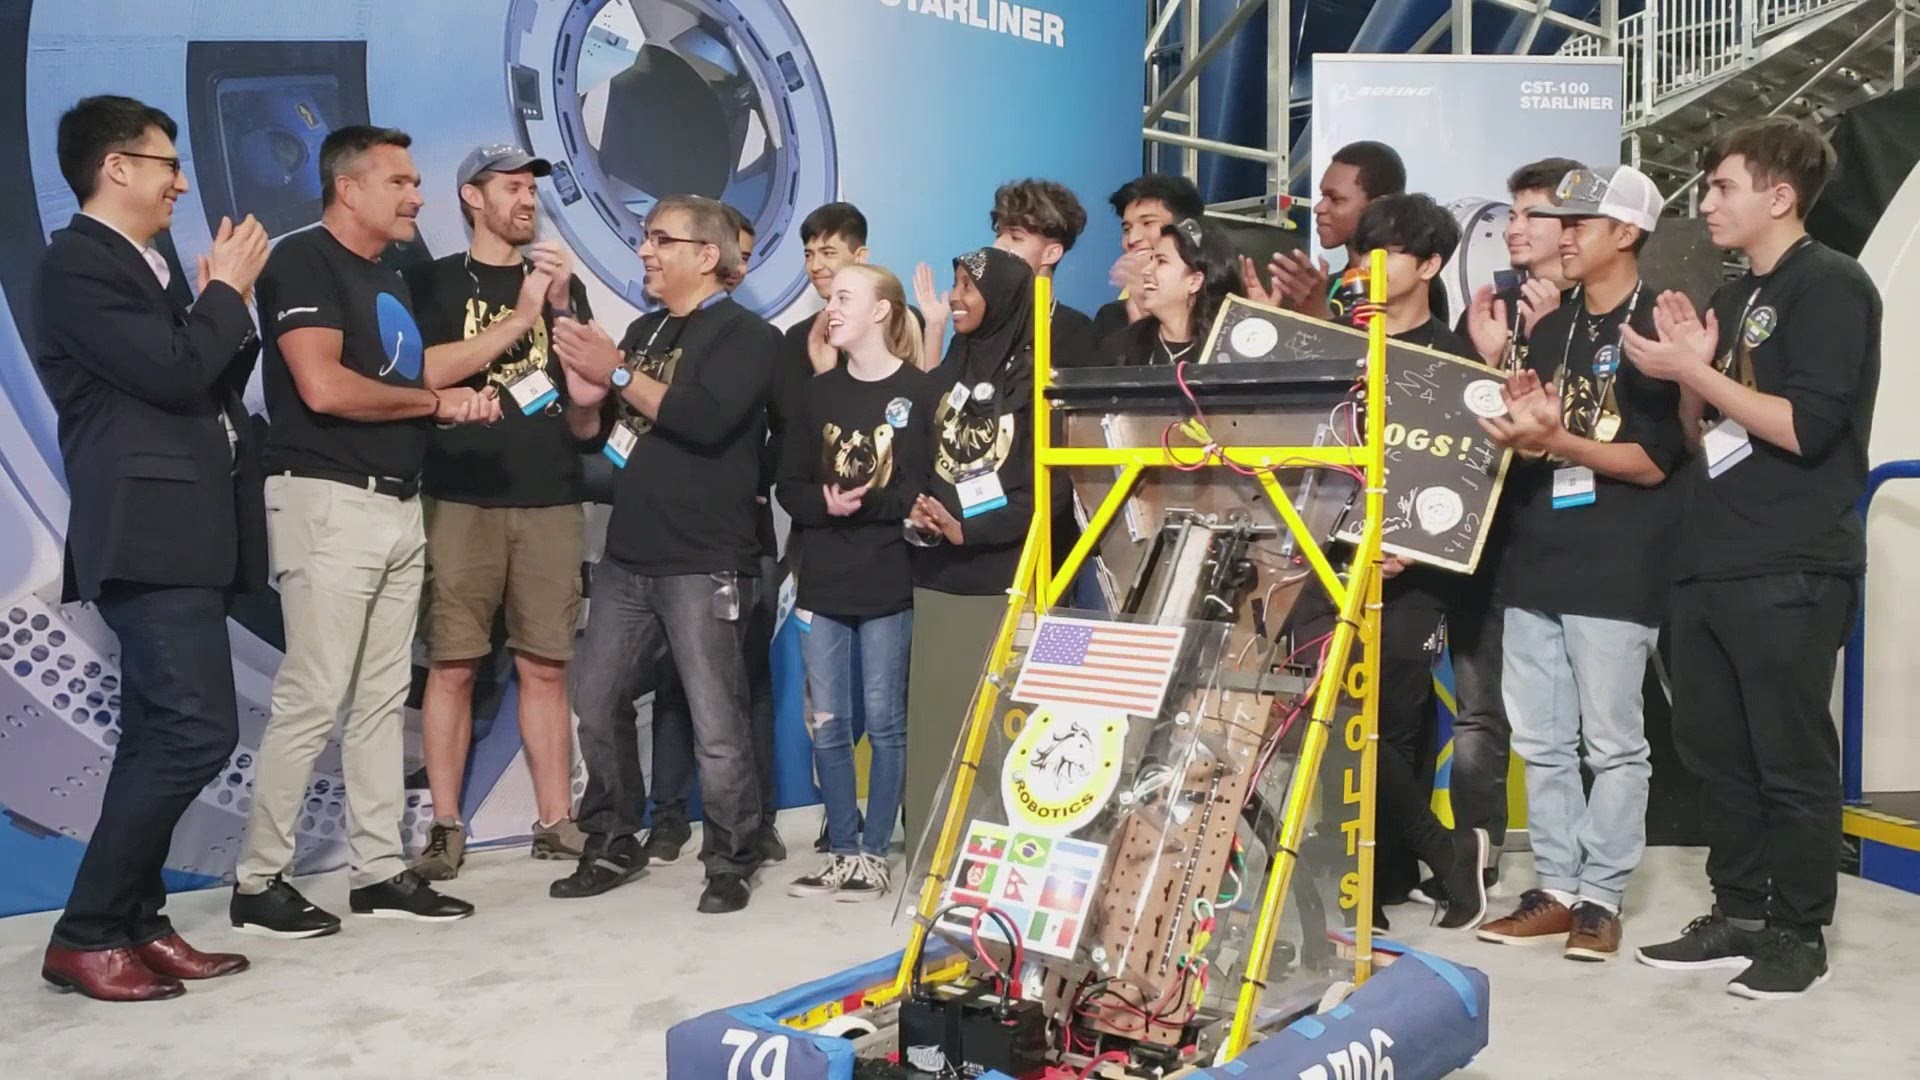 The team, which is from Cottonwood High School in Salt Lake City, Utah- made it to the FIRST Robotics World Championships with a robot made from donated scraps and supplies.